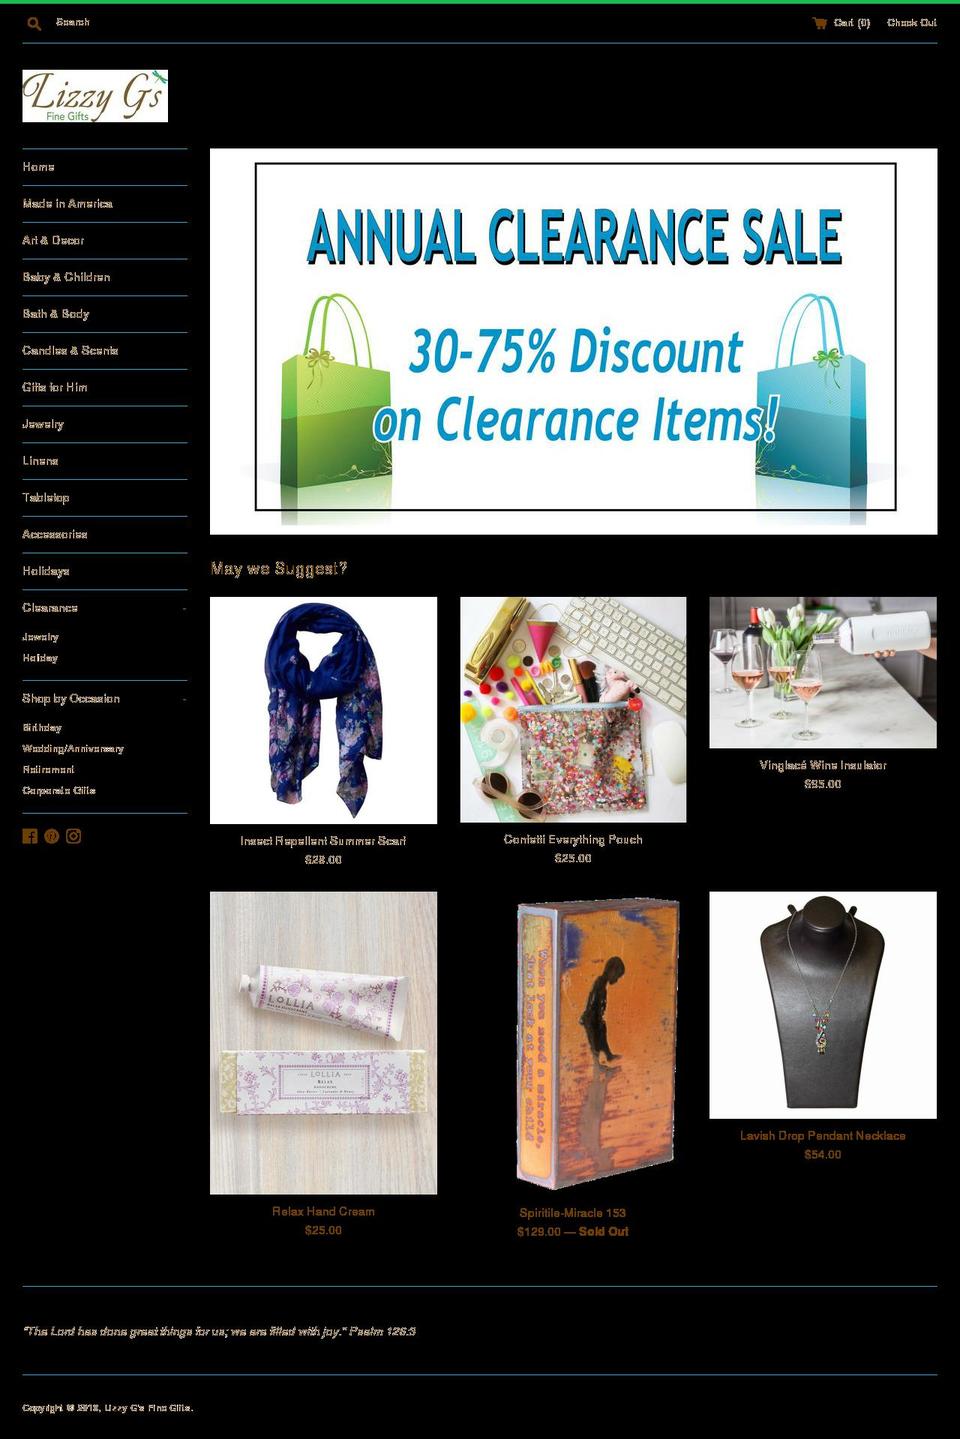 Crave Shopify theme site example lizzygsgifts.com